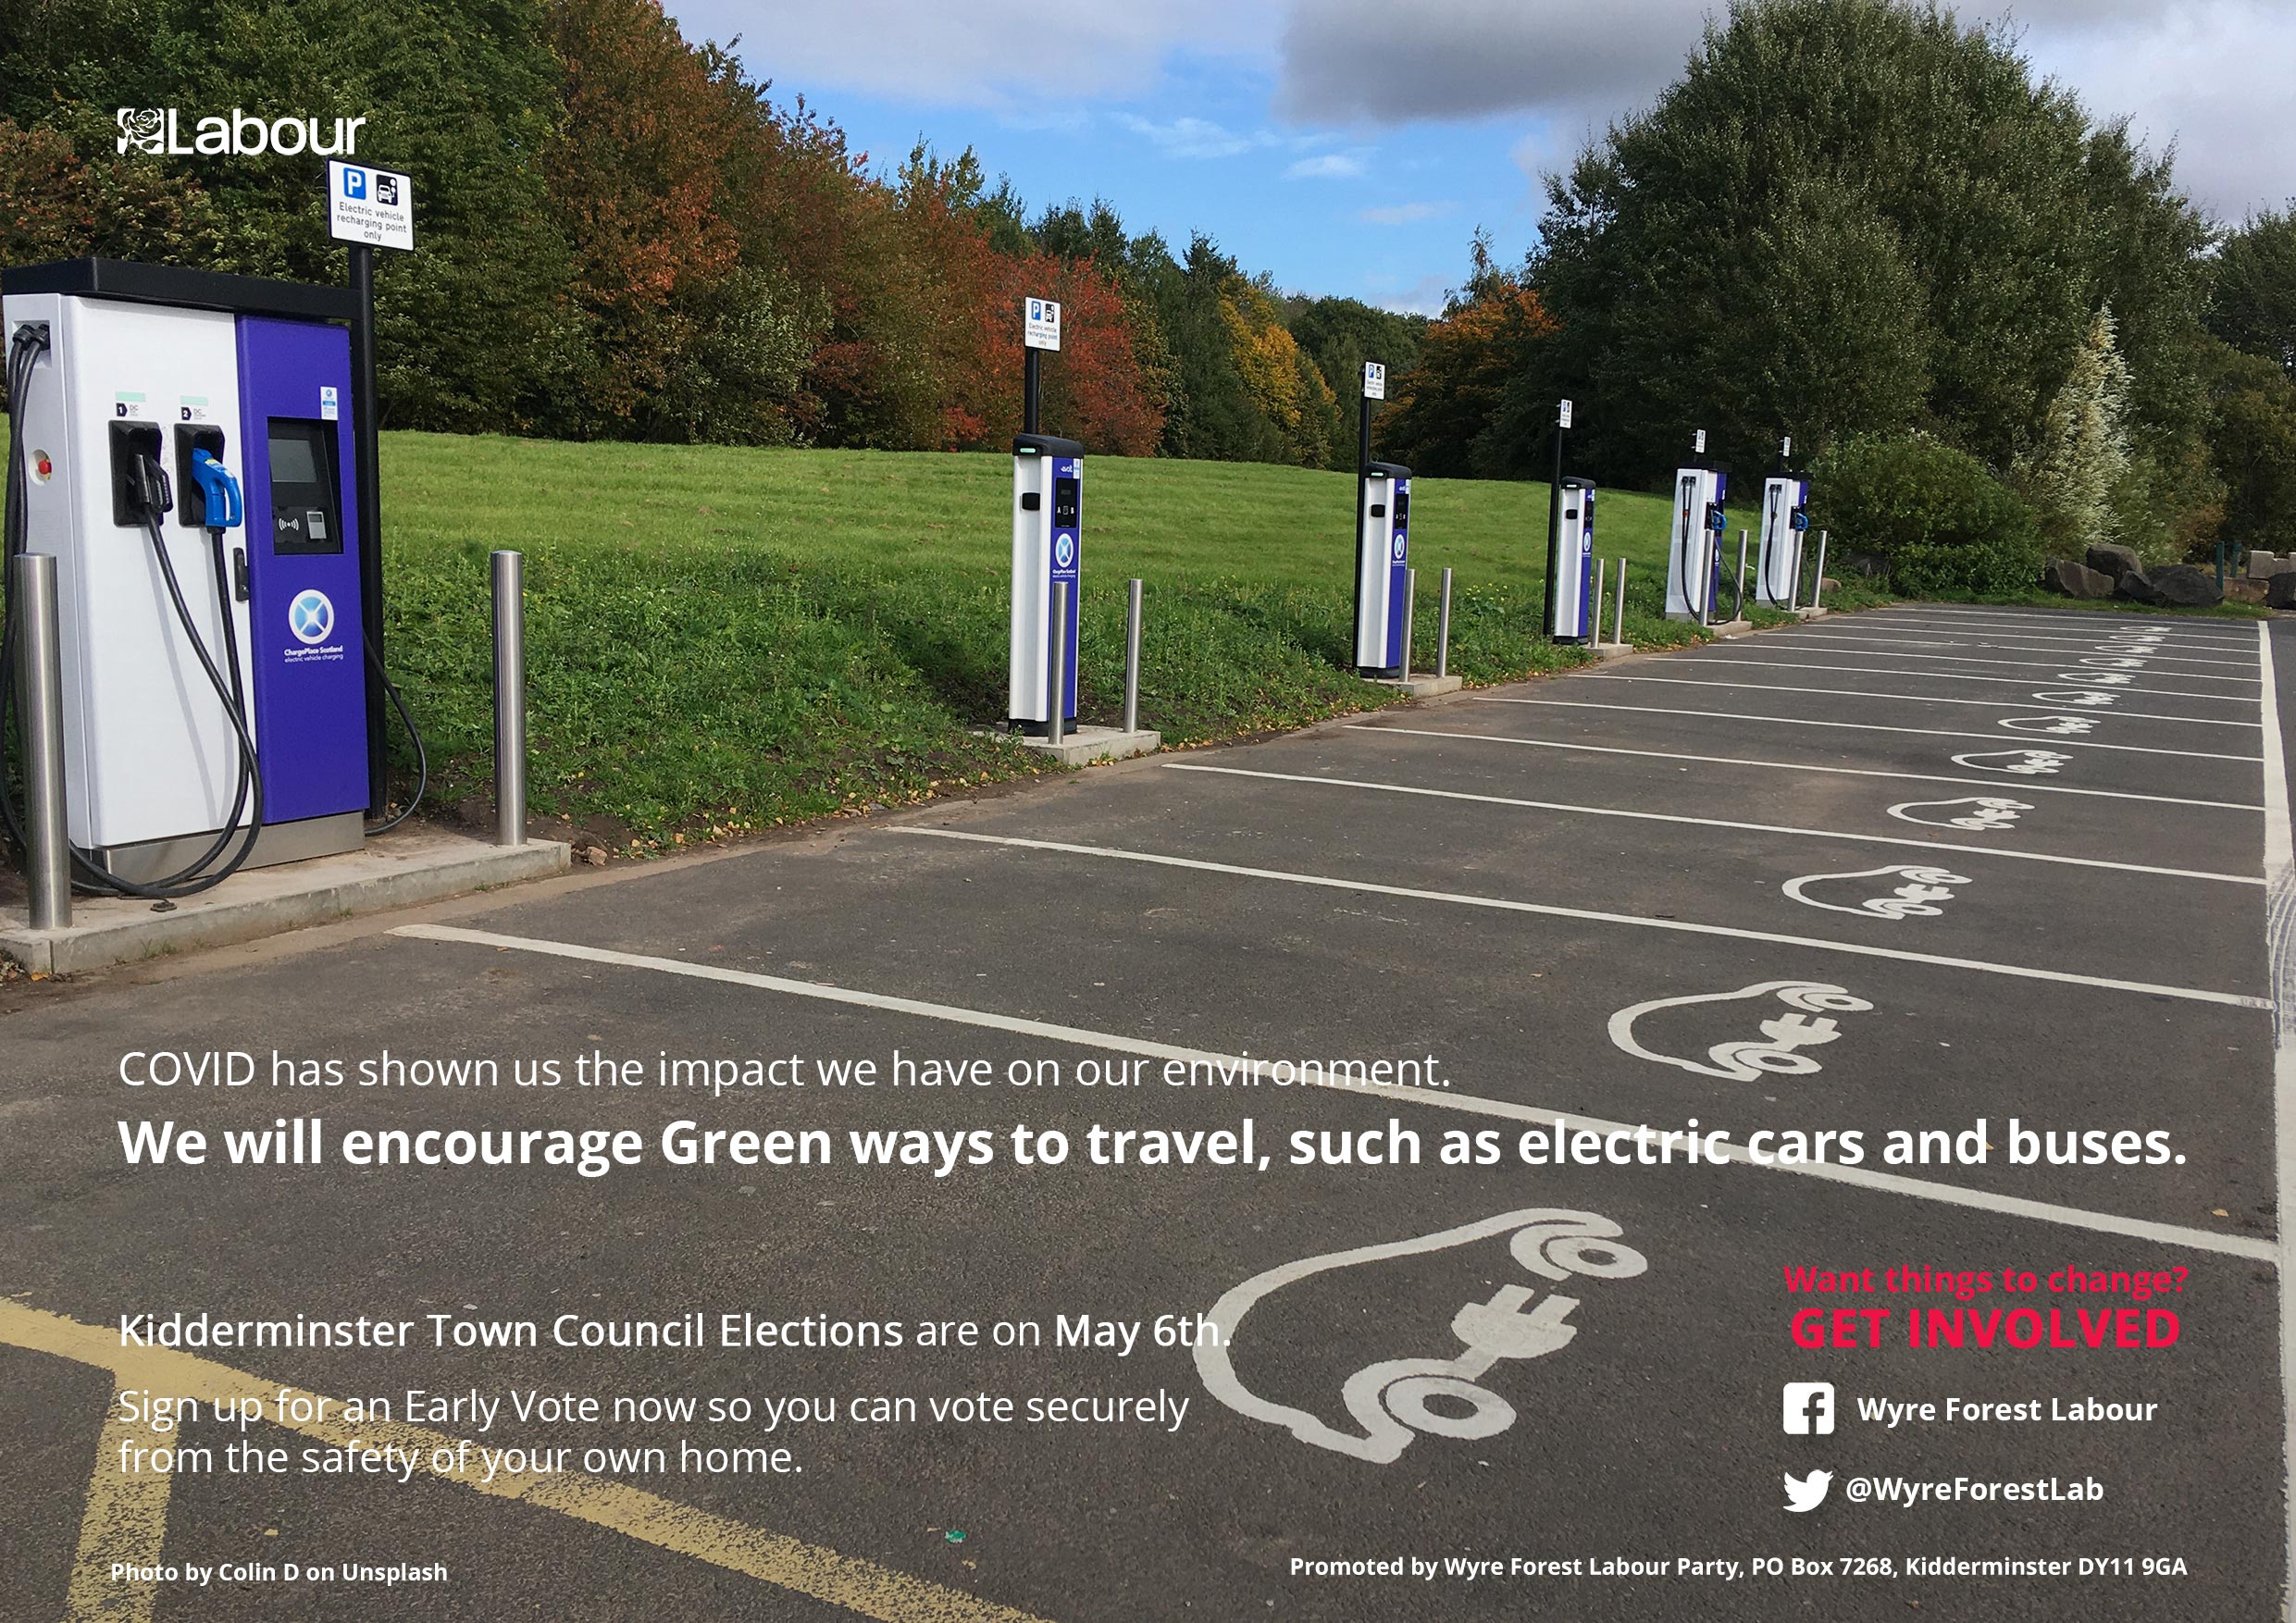 Our Pledge: We will encourage green ways to travel, such as electric cars and buses